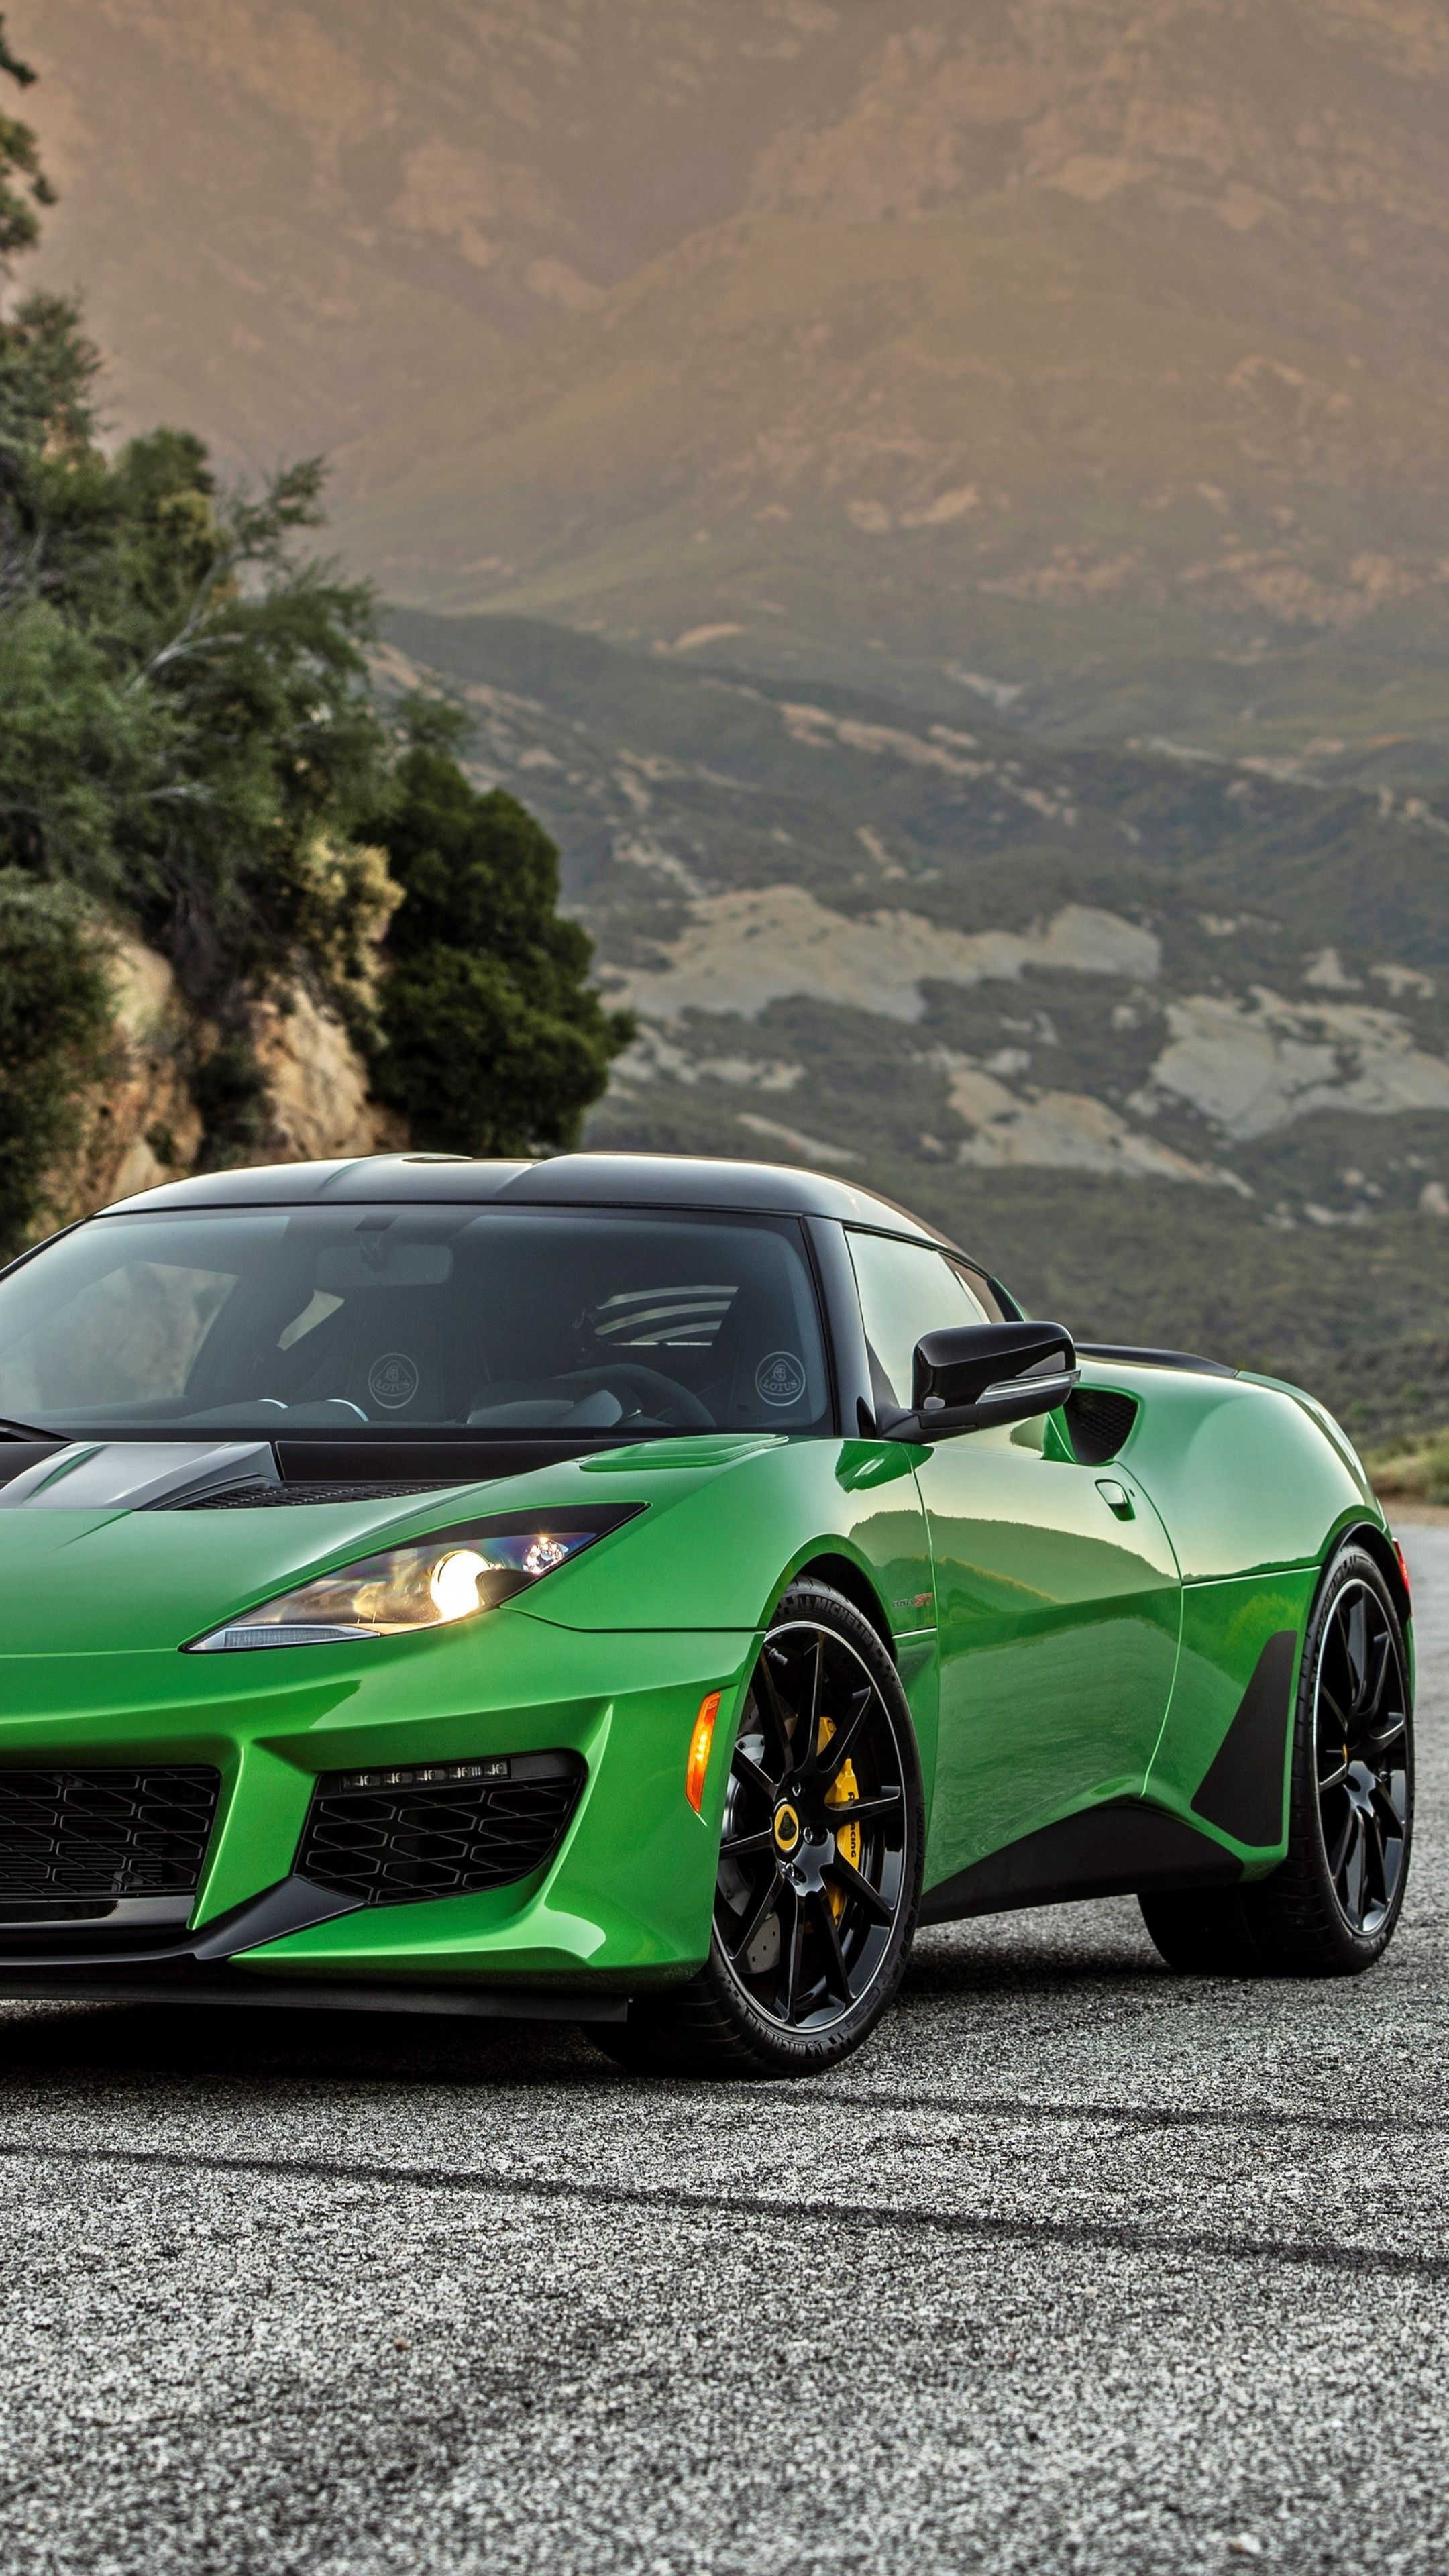 Lotus Evora, Stunning wallpapers, Sports car excellence, Unforgettable performance, 2160x3840 4K Handy